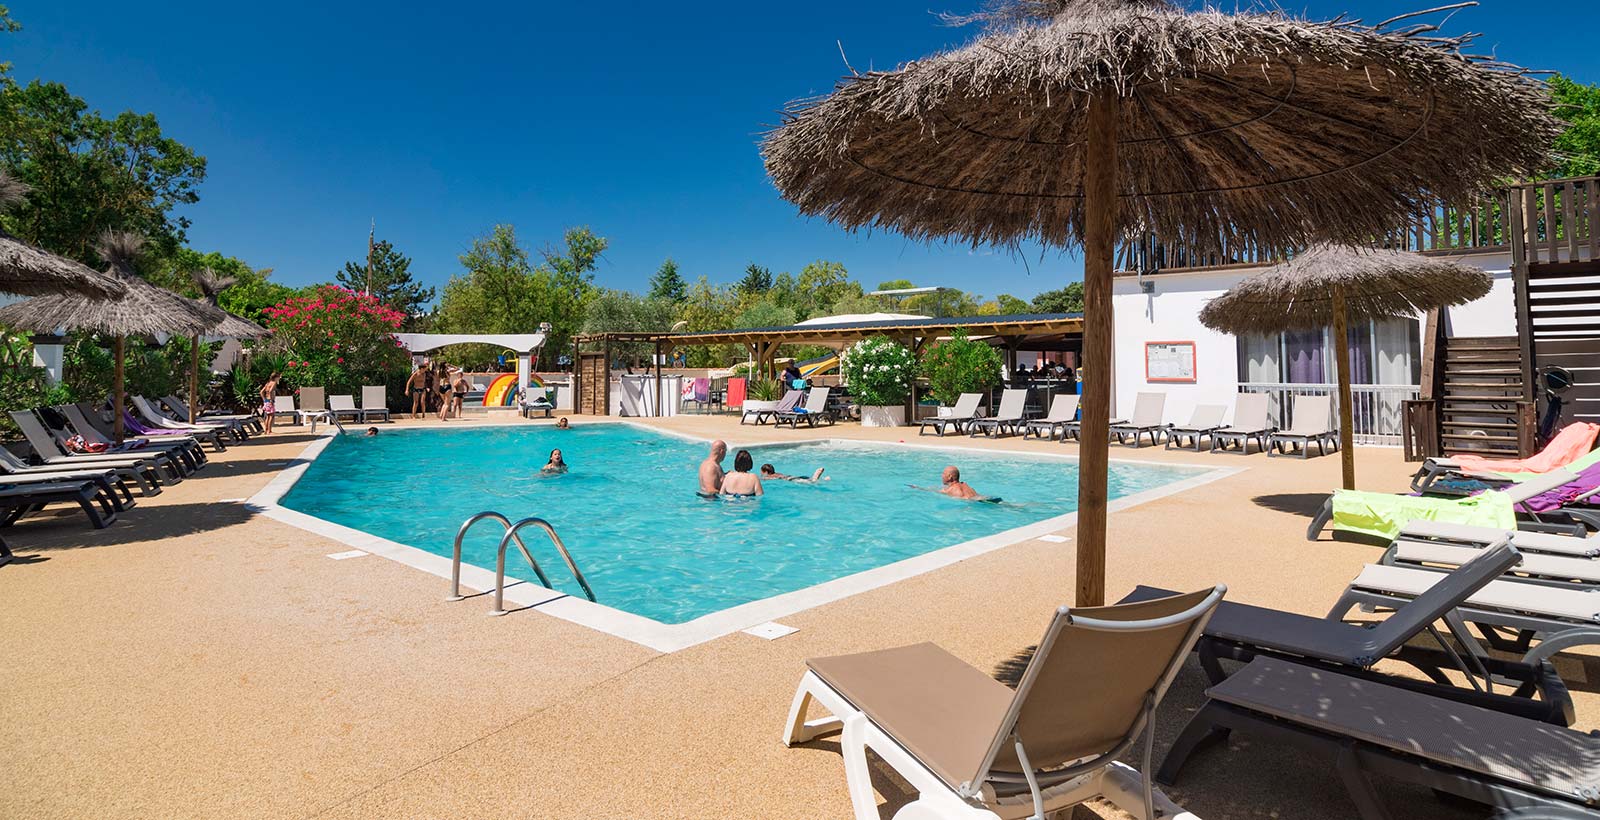 Beach, deckchairs and parasols of the aquatic area of the campsite in Canet in Hérault